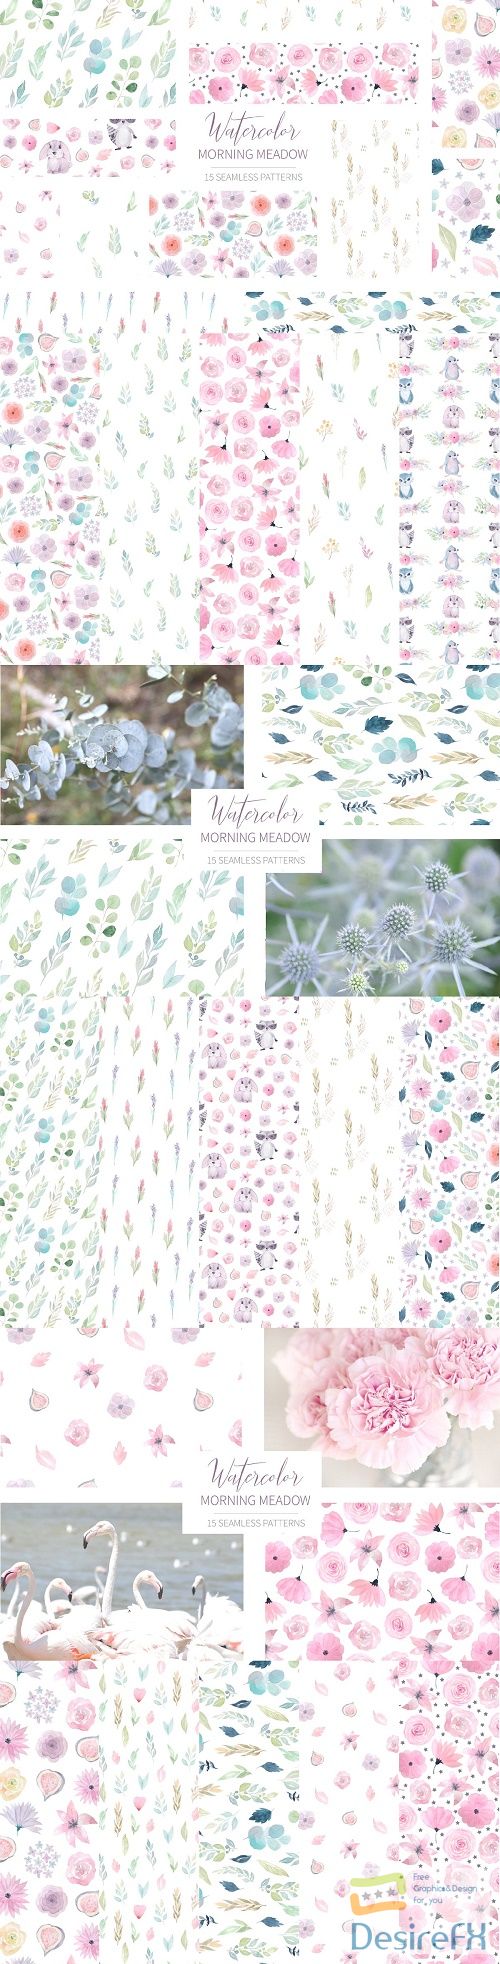 15 Morning Meadow Seamless Patterns - 2363127